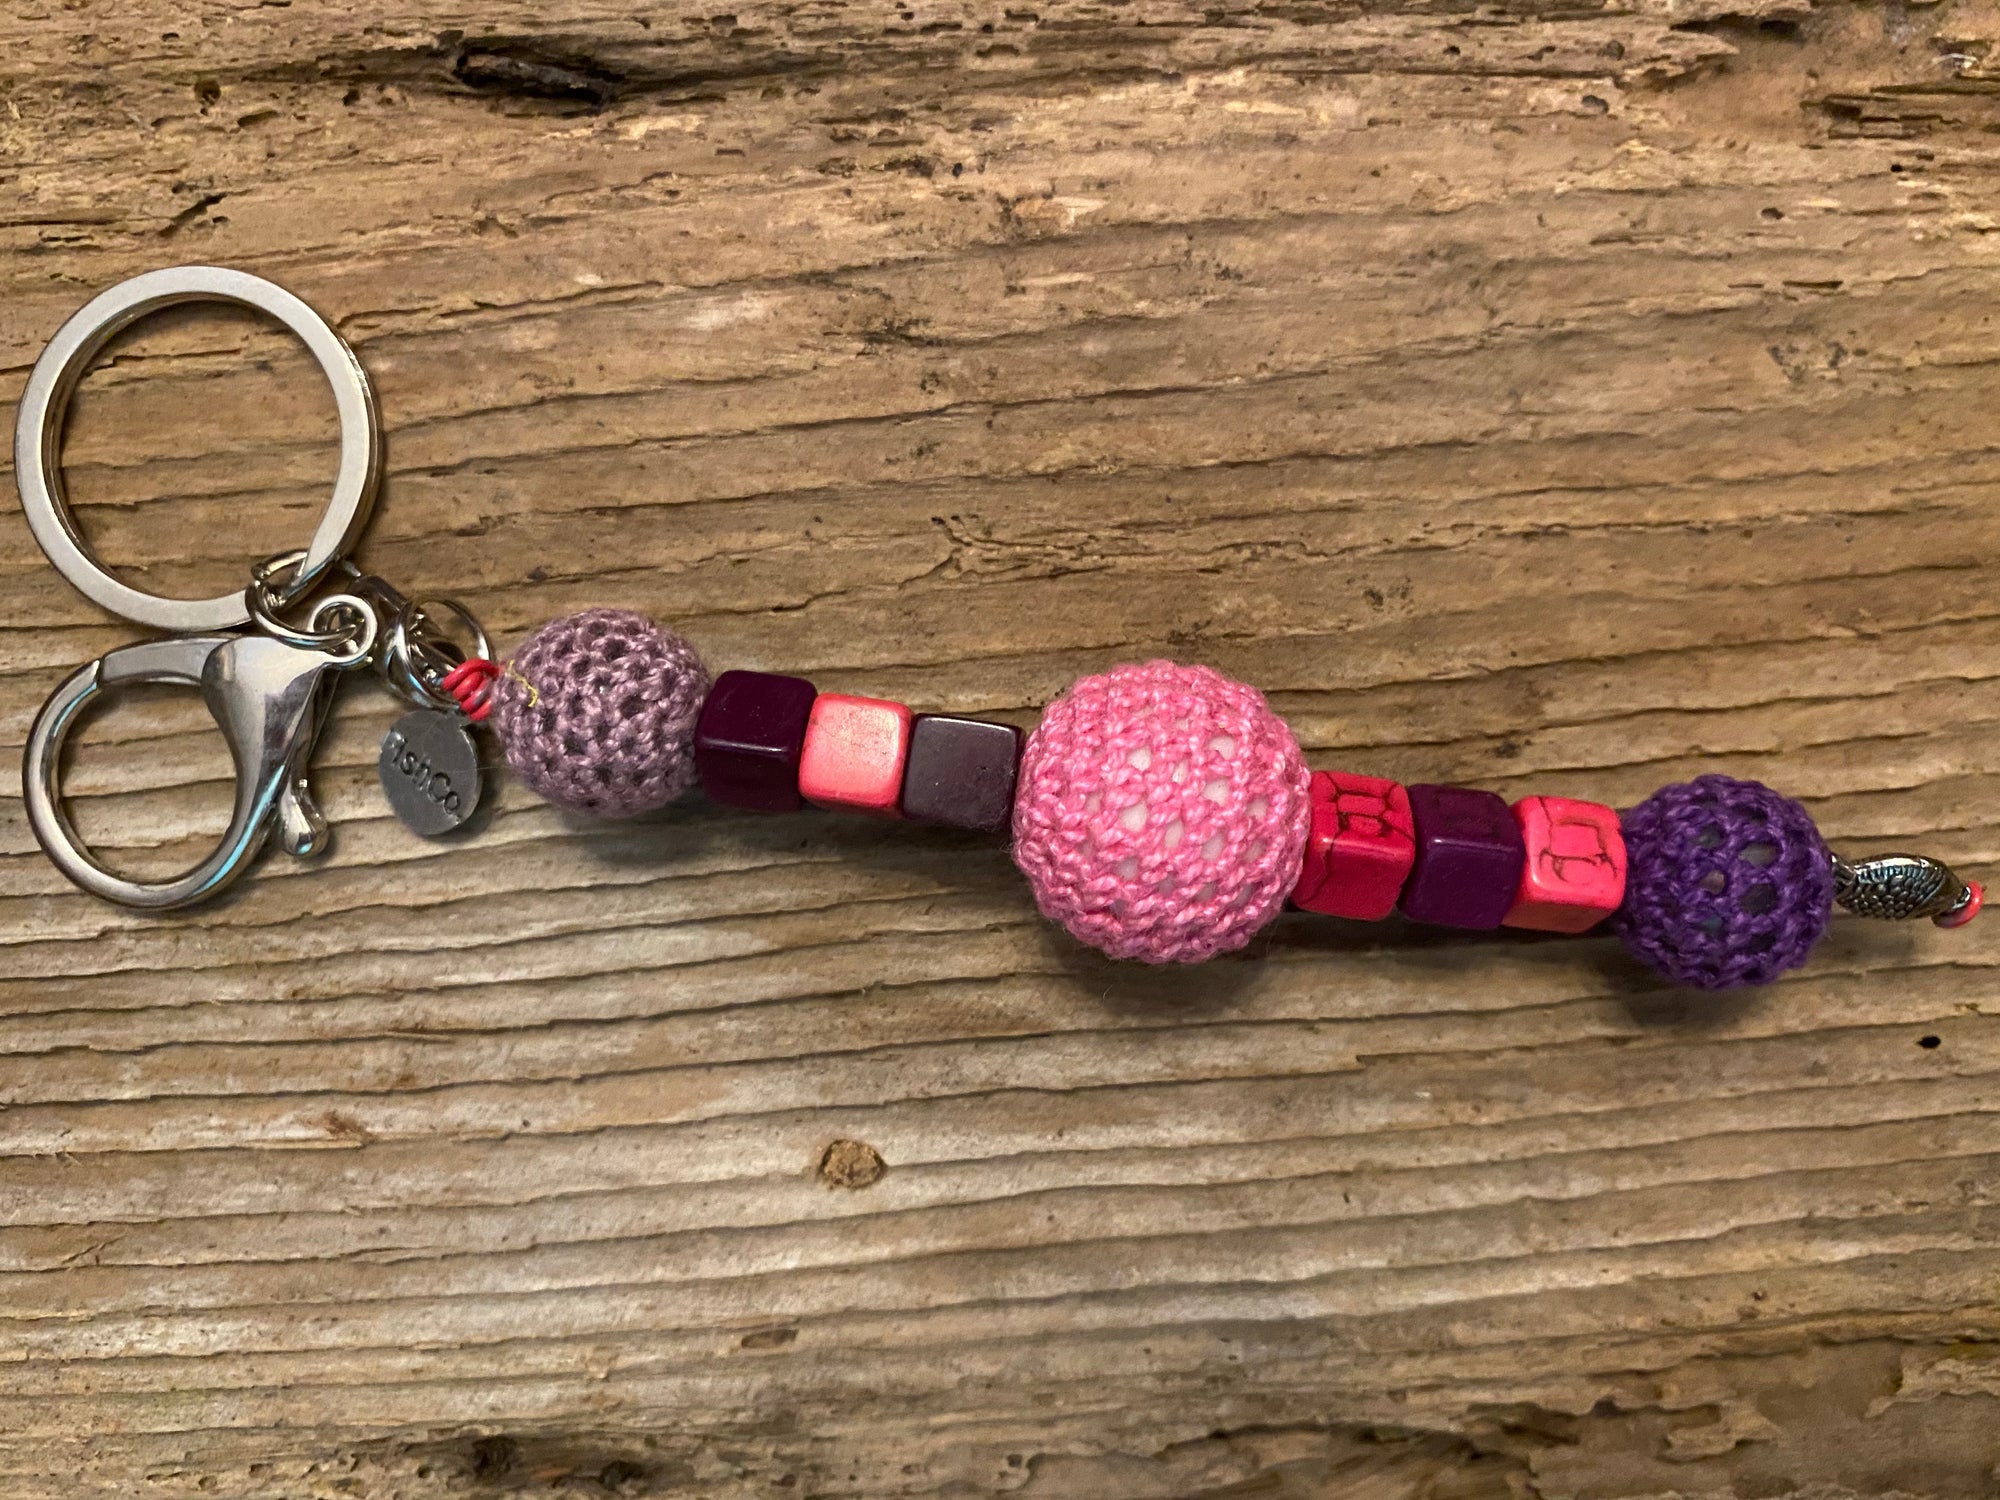 Shanga Keychain pink and purple macramé with coordinating howlite squares